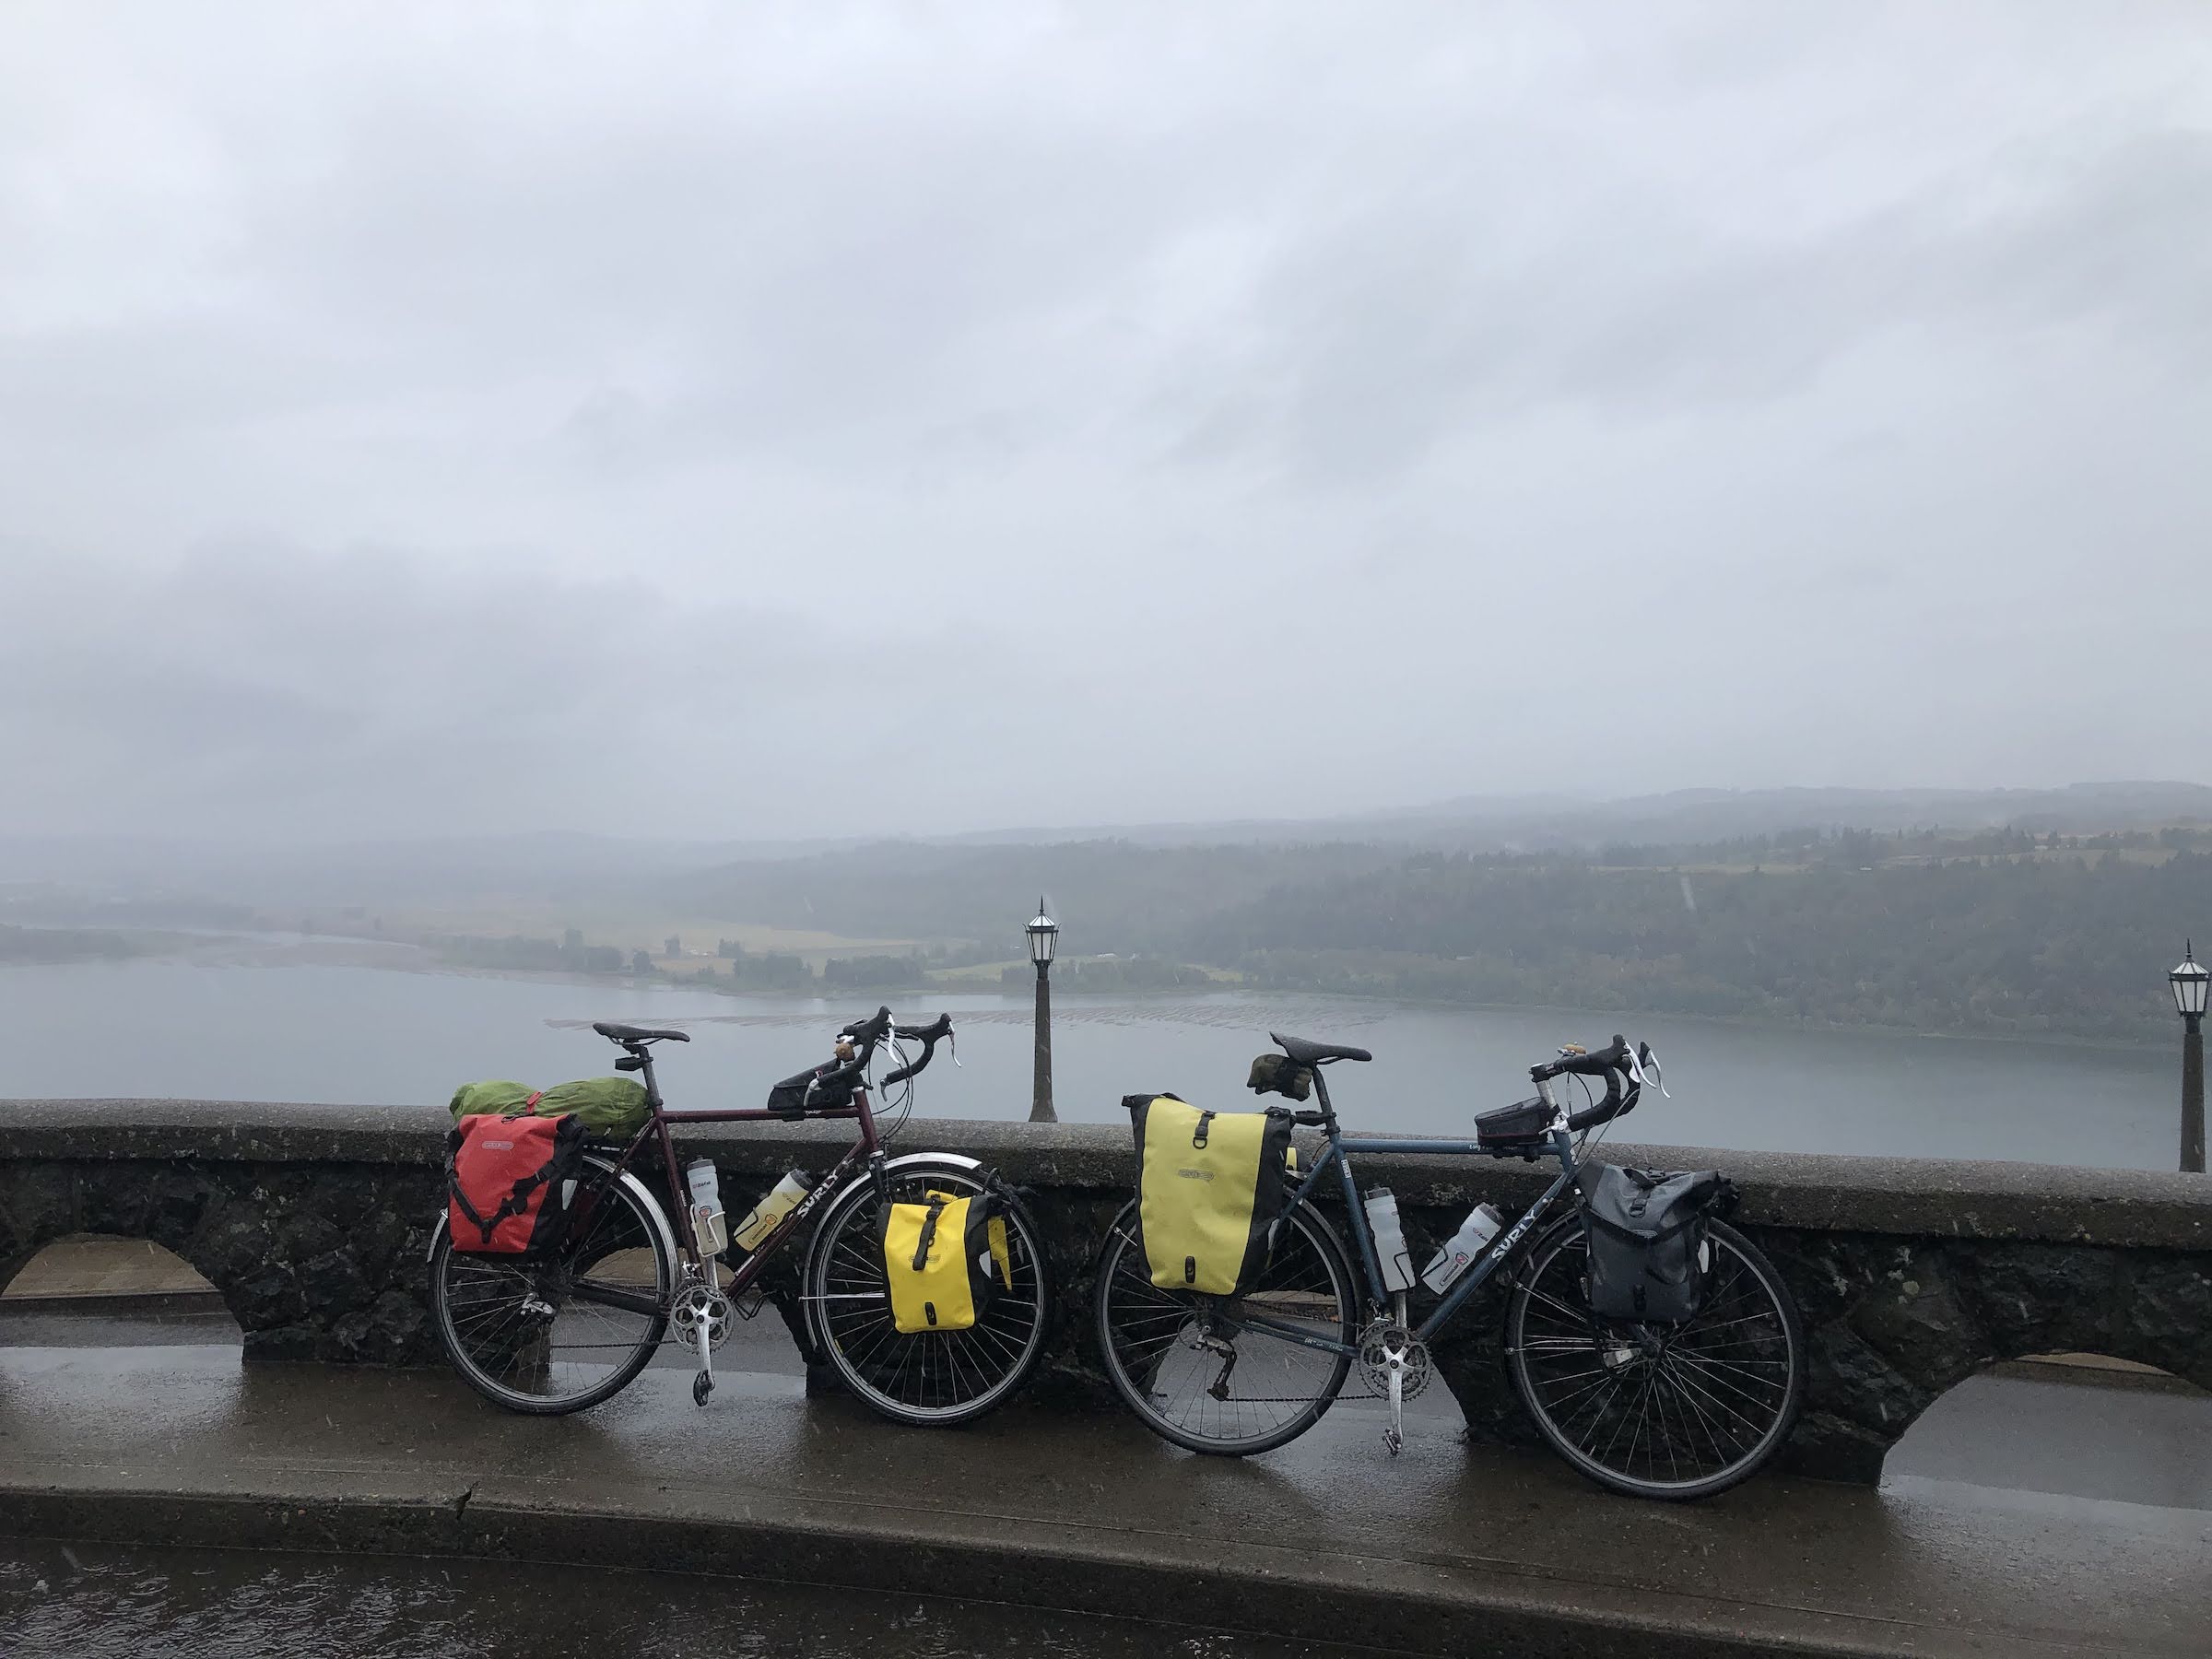 two touring bikes with panniers leaning against a railing